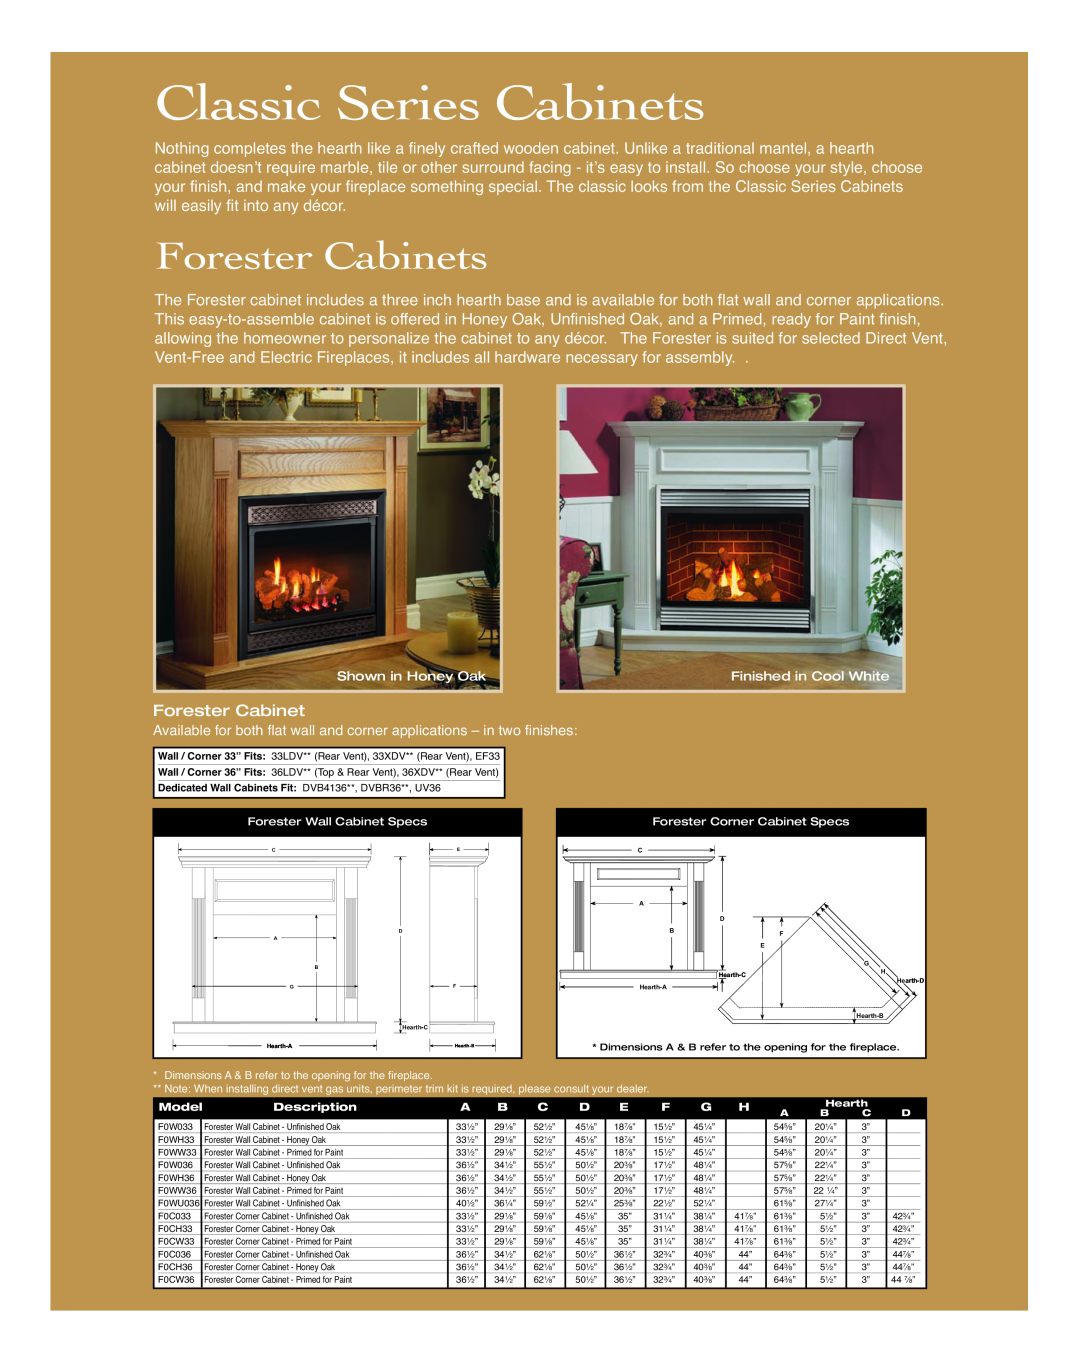 Vermont Casting manual Forester Cabinets, Classic SeriesCabinets 